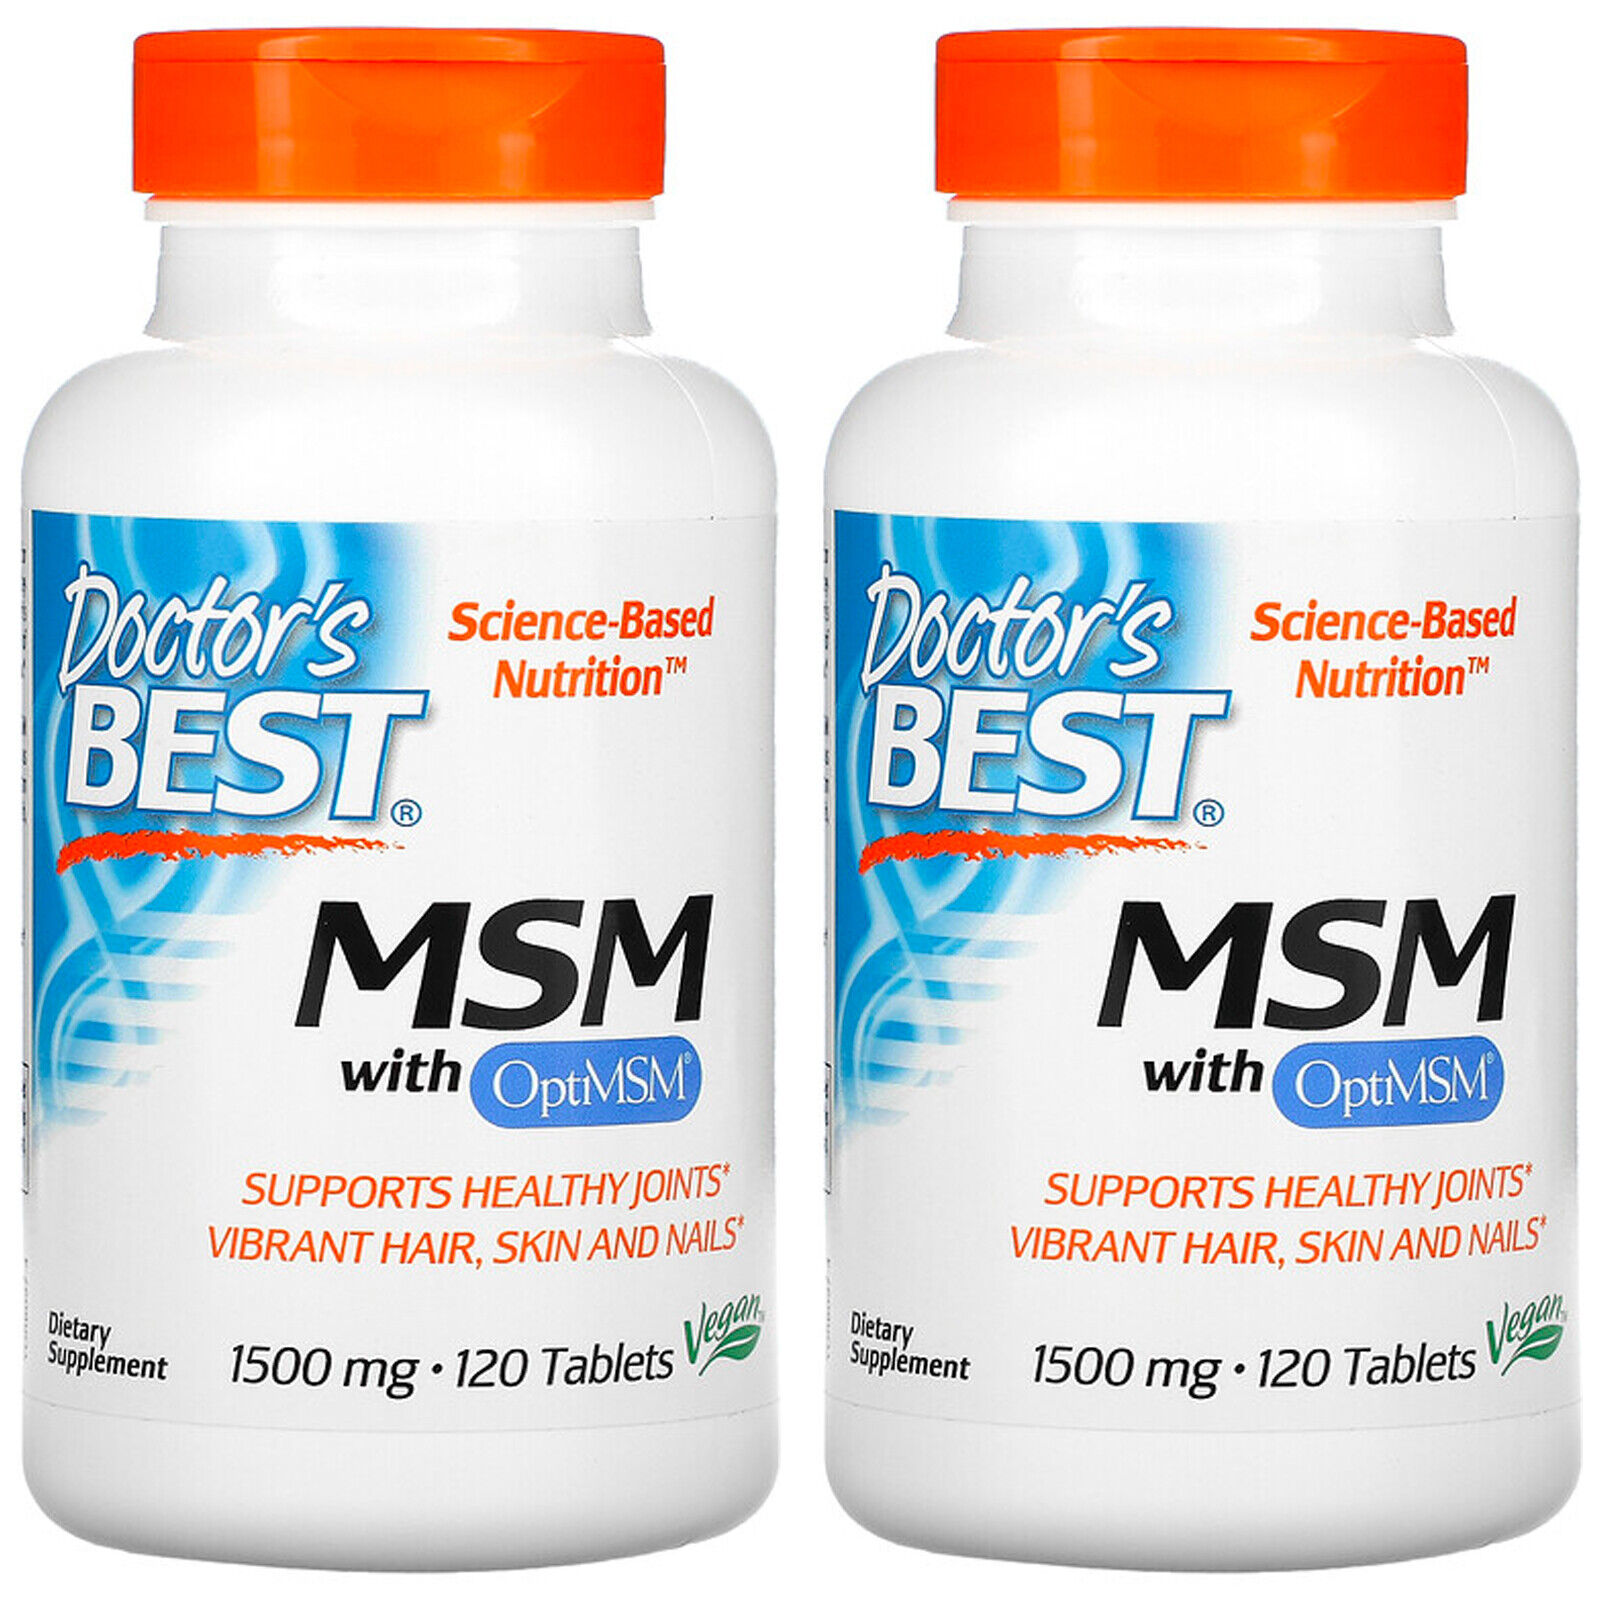 Doctor's Best, (2 Pack) MSM with OptiMSM, 1,500 mg, 120 Tablets